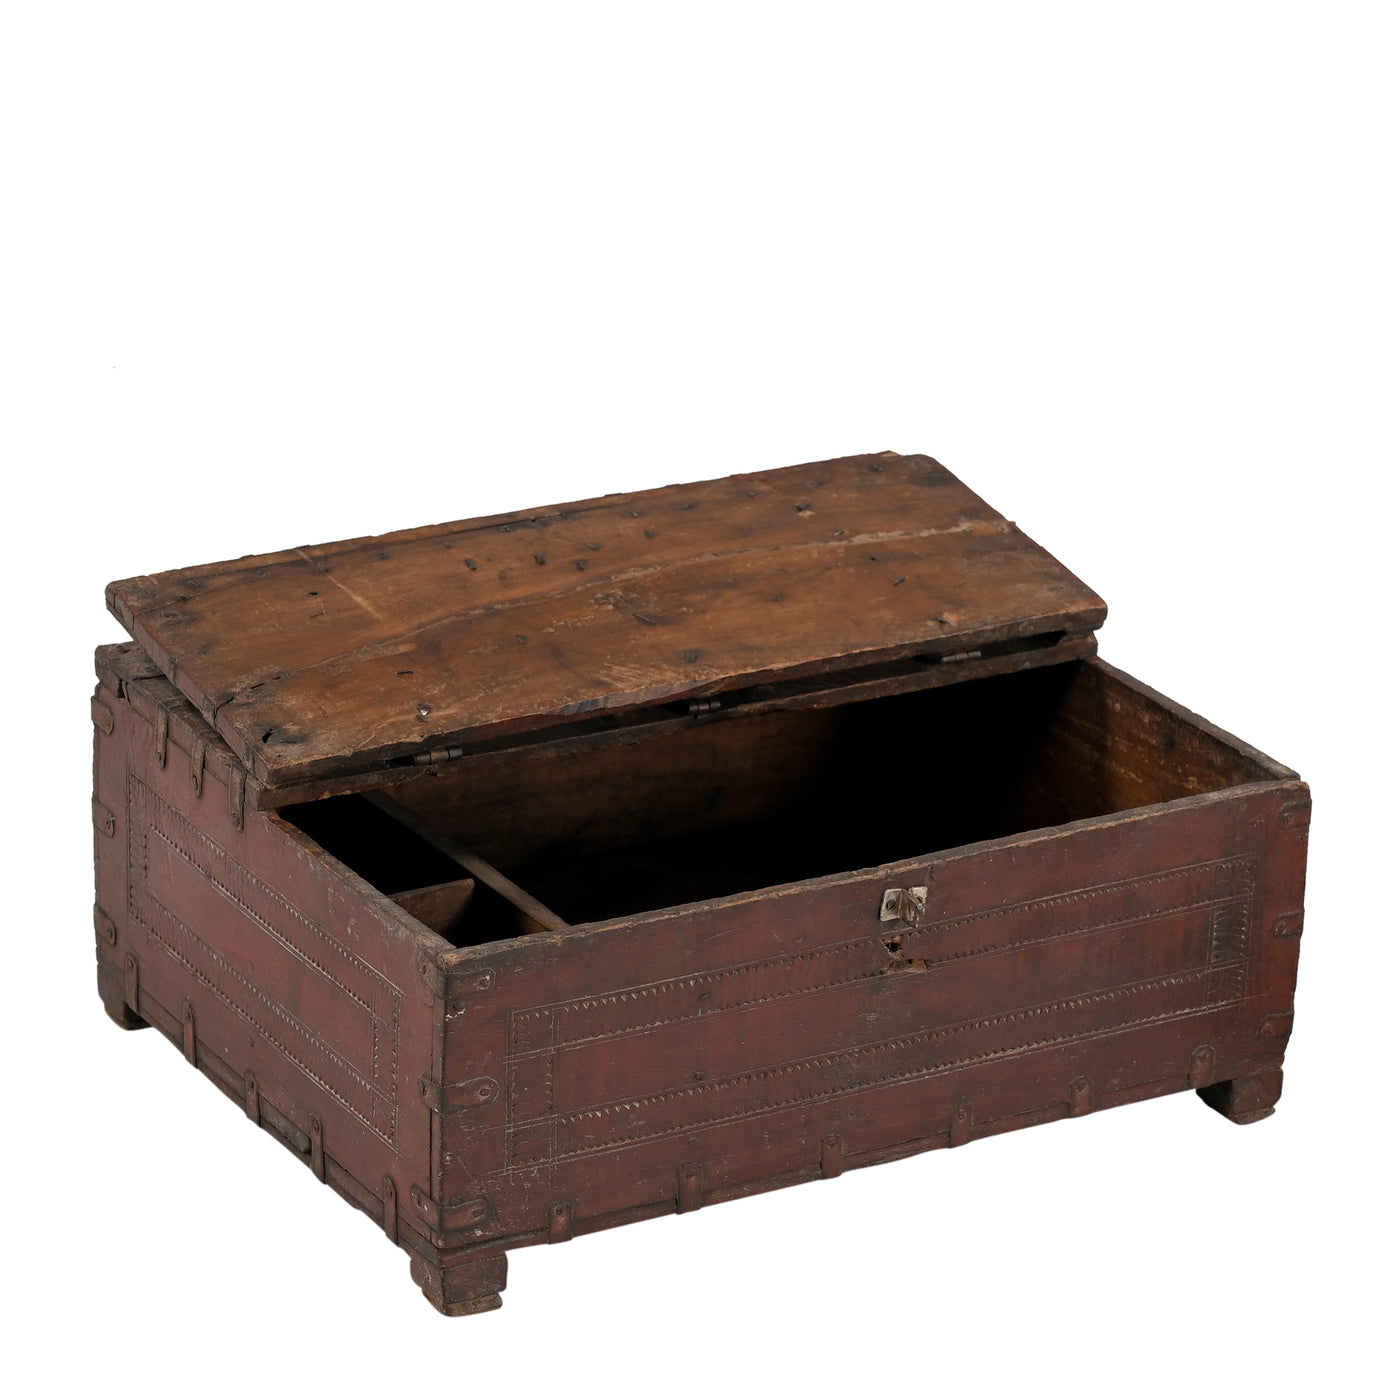 Peti - Wooden dowry chest n ° 12